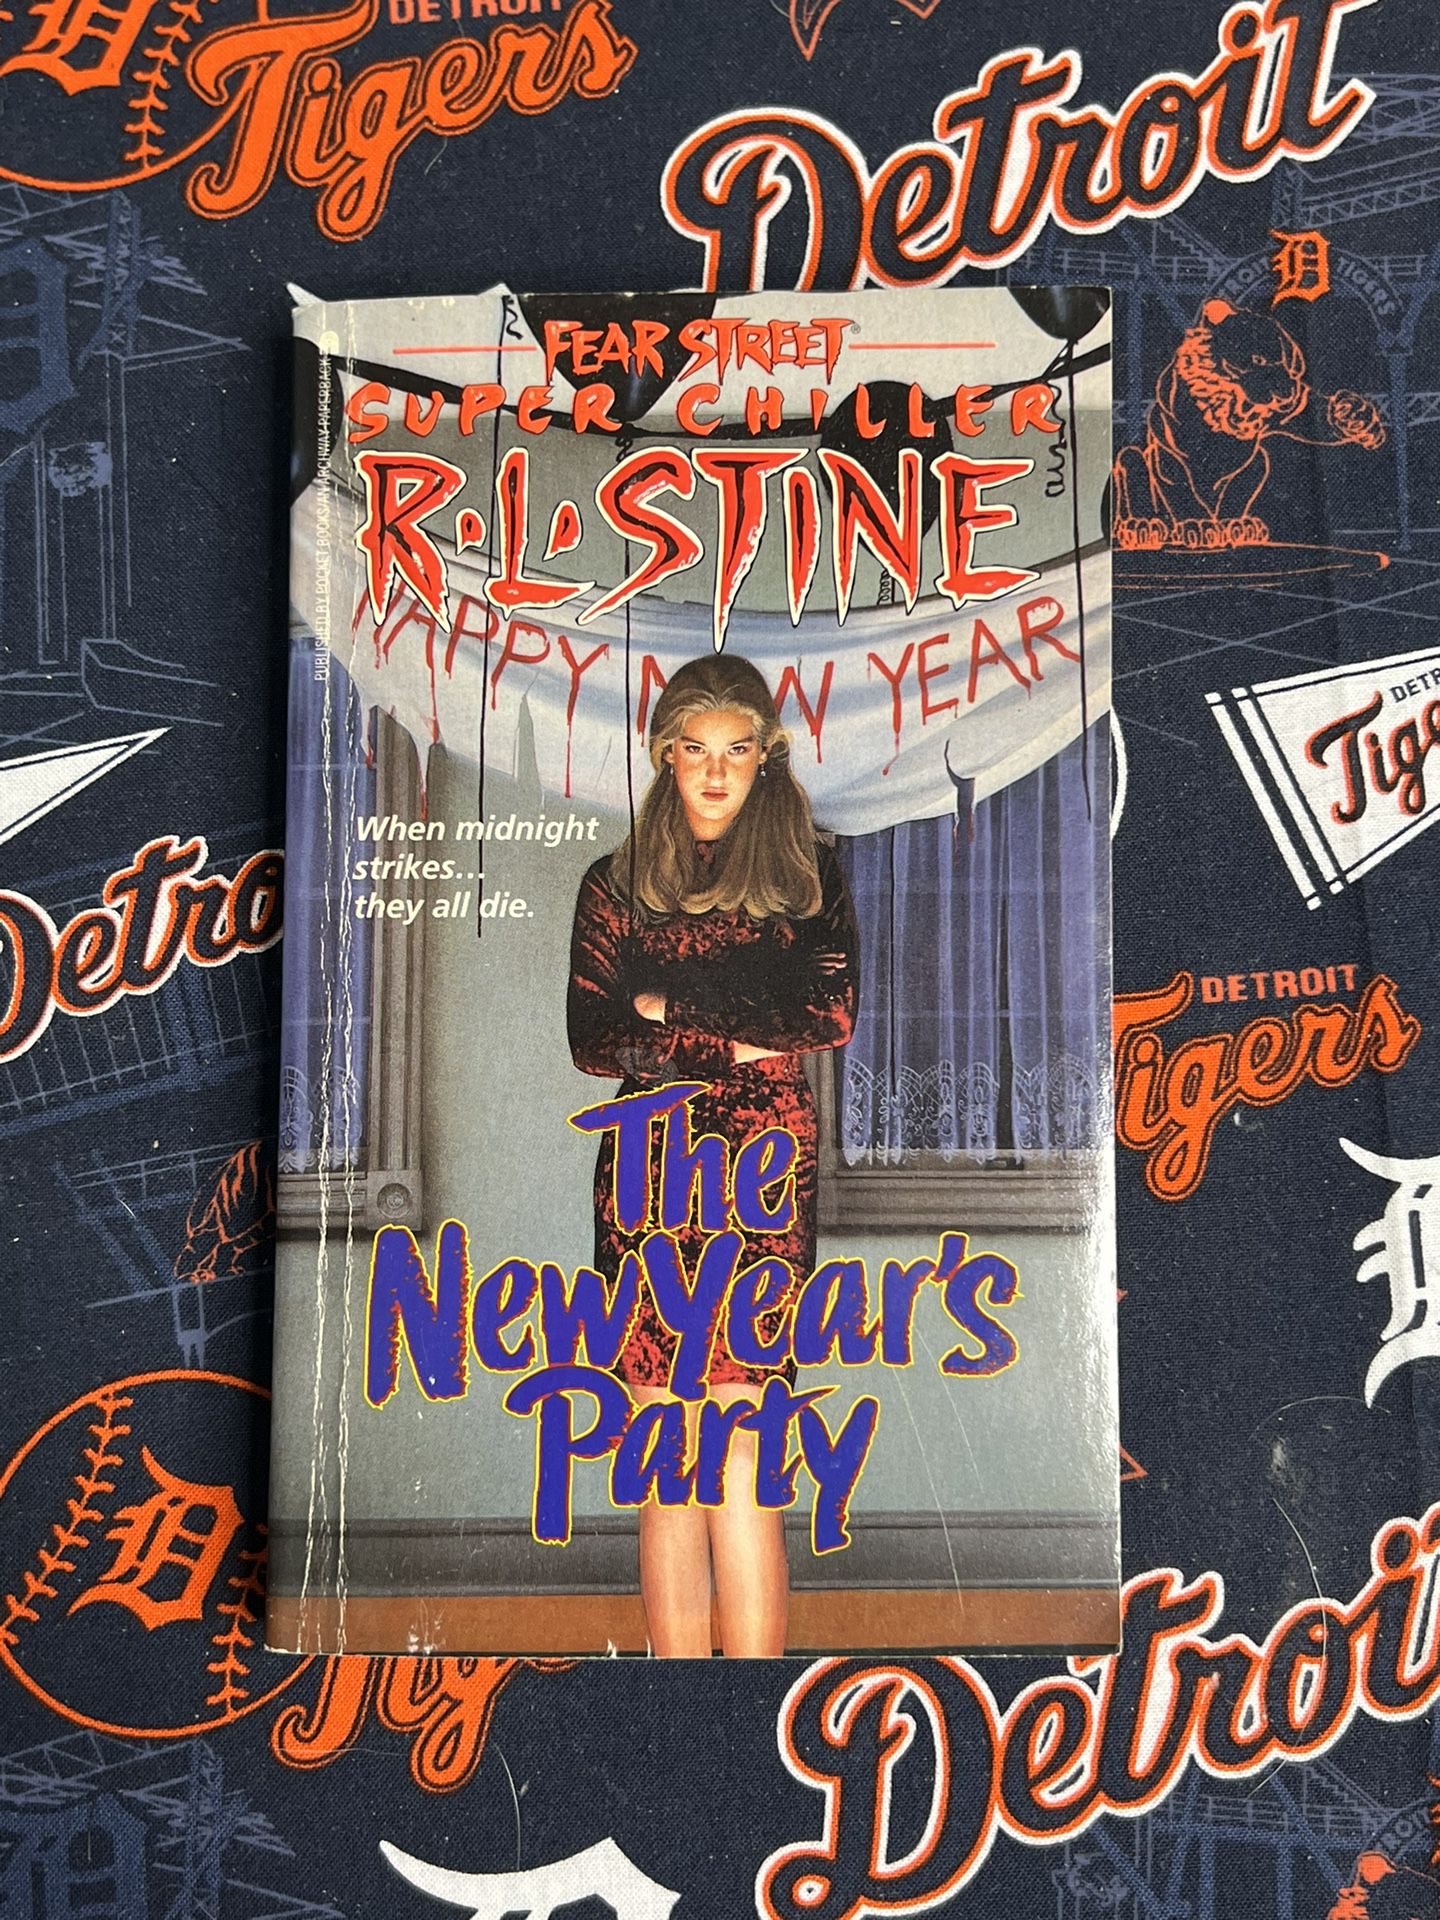 The New Years Party Fear Street Super Chiller By RL Stine 1st Printing